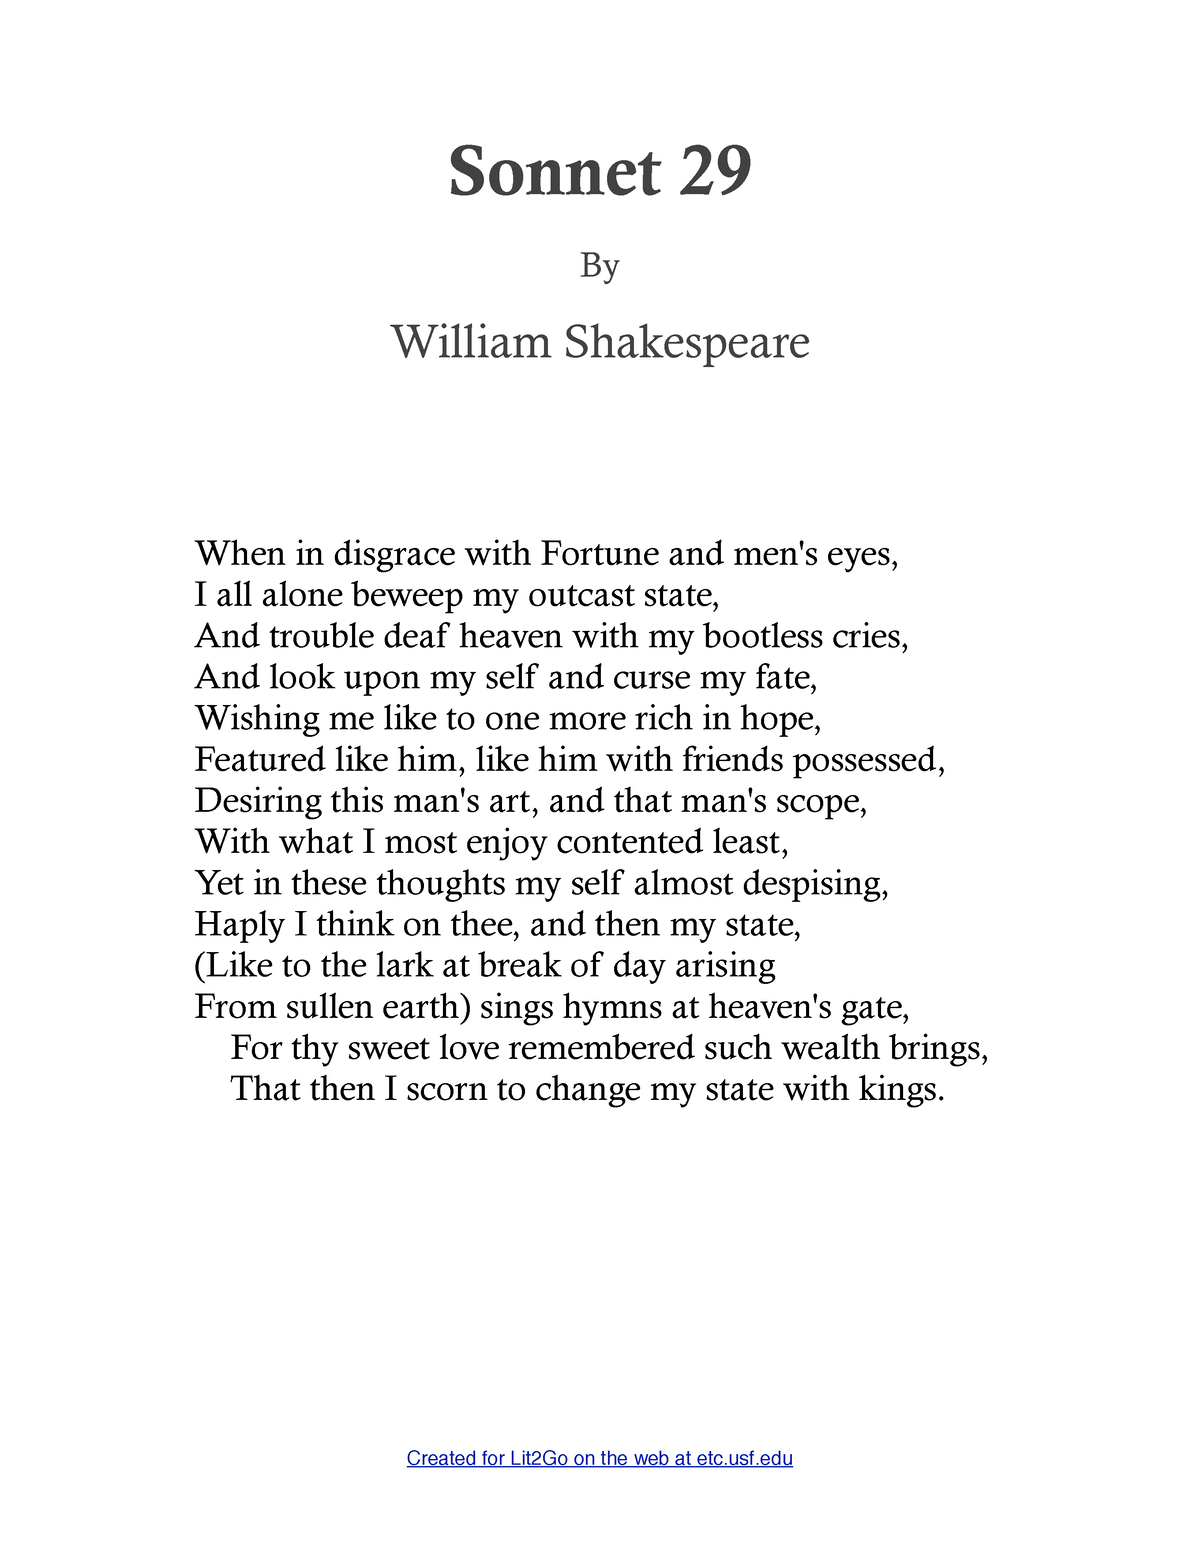 explanation of sonnet 29